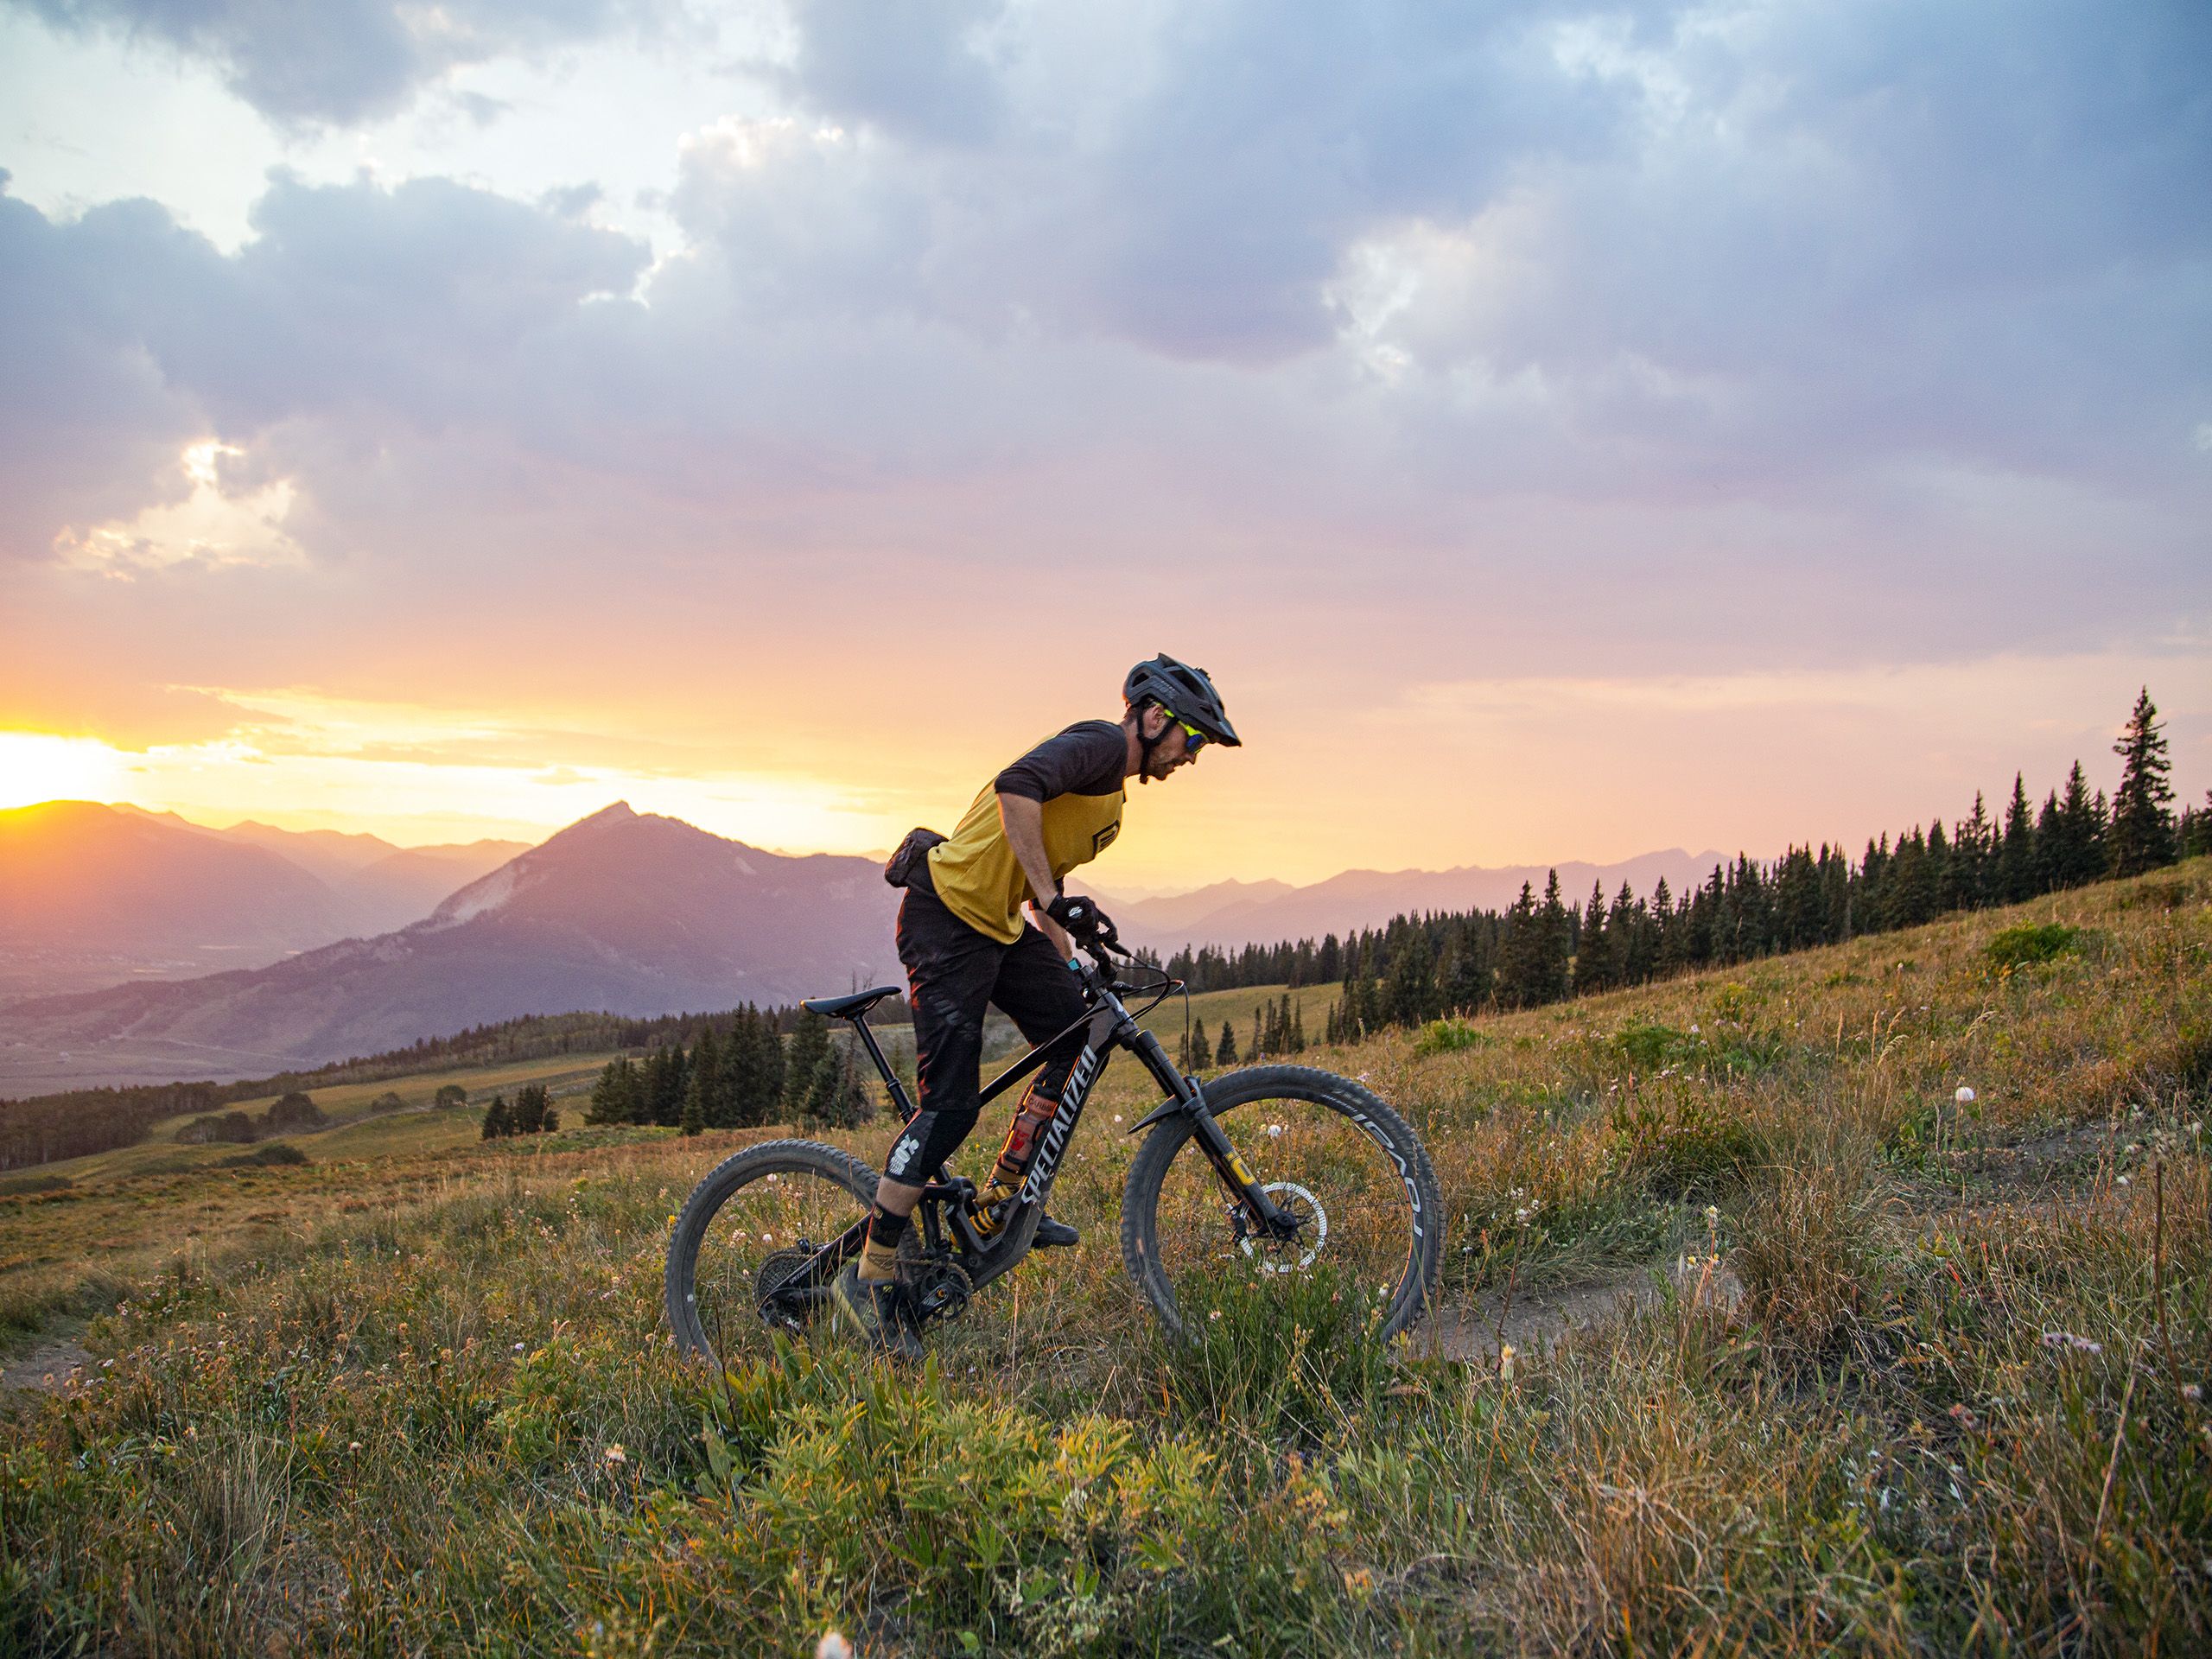 A mountain biker rides Point Lookout trail (one of the Cement Creek trails) at sunset.